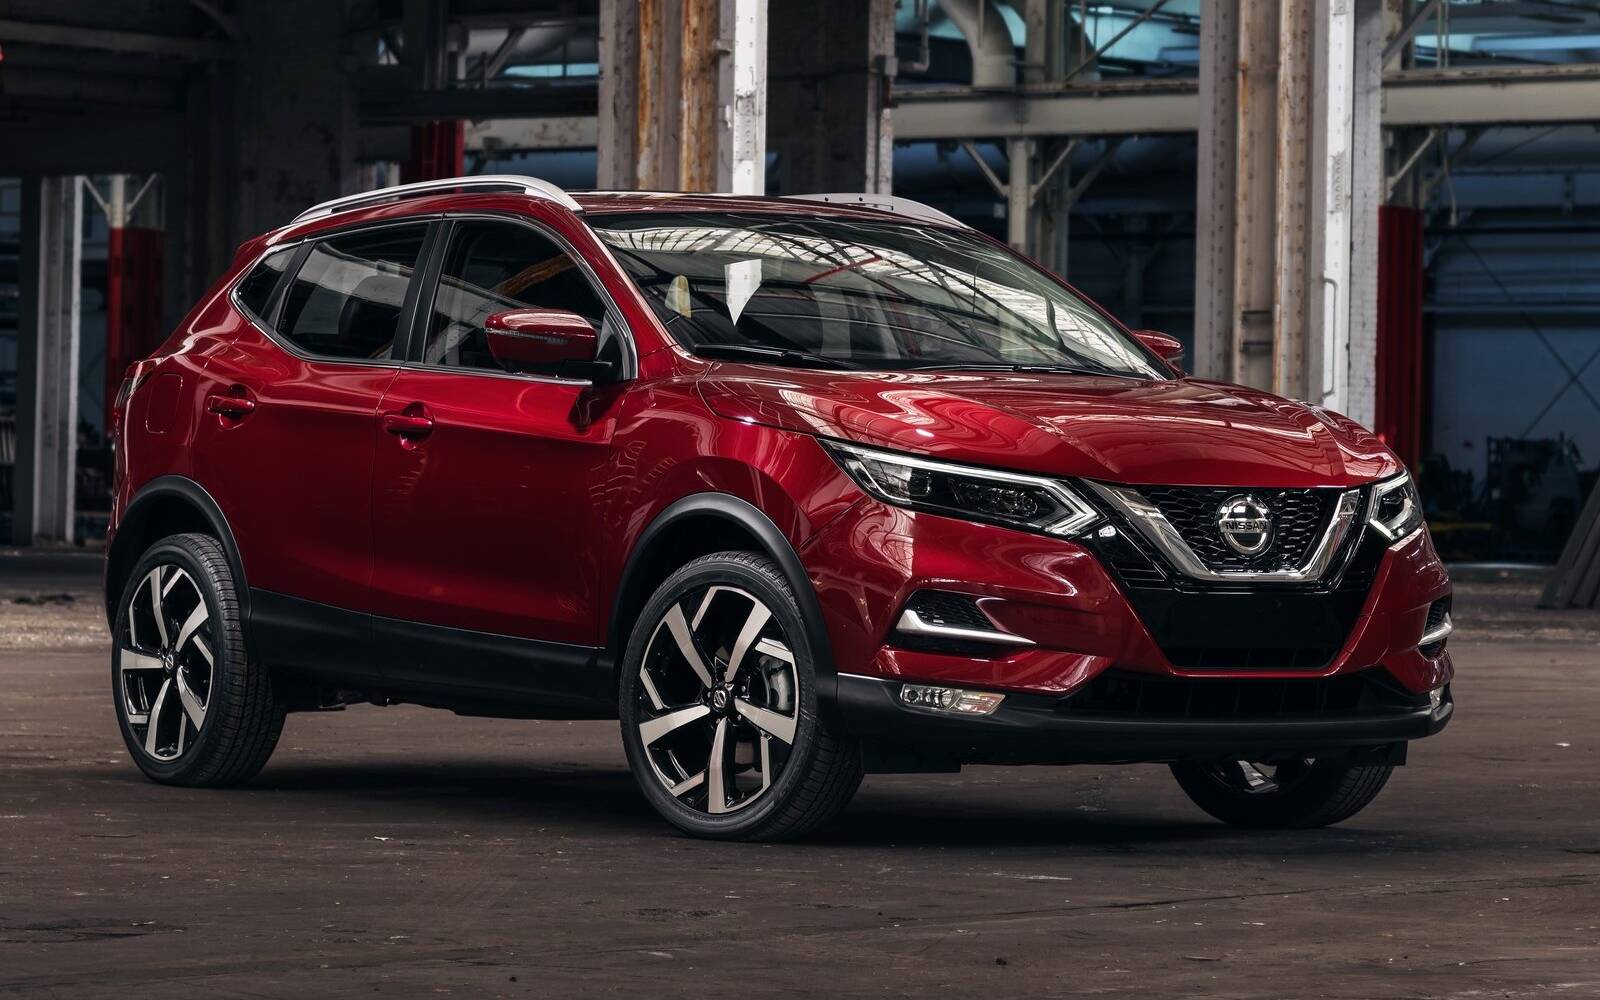 2021 Nissan Qashqai News Reviews Picture Galleries And Videos The Car Guide